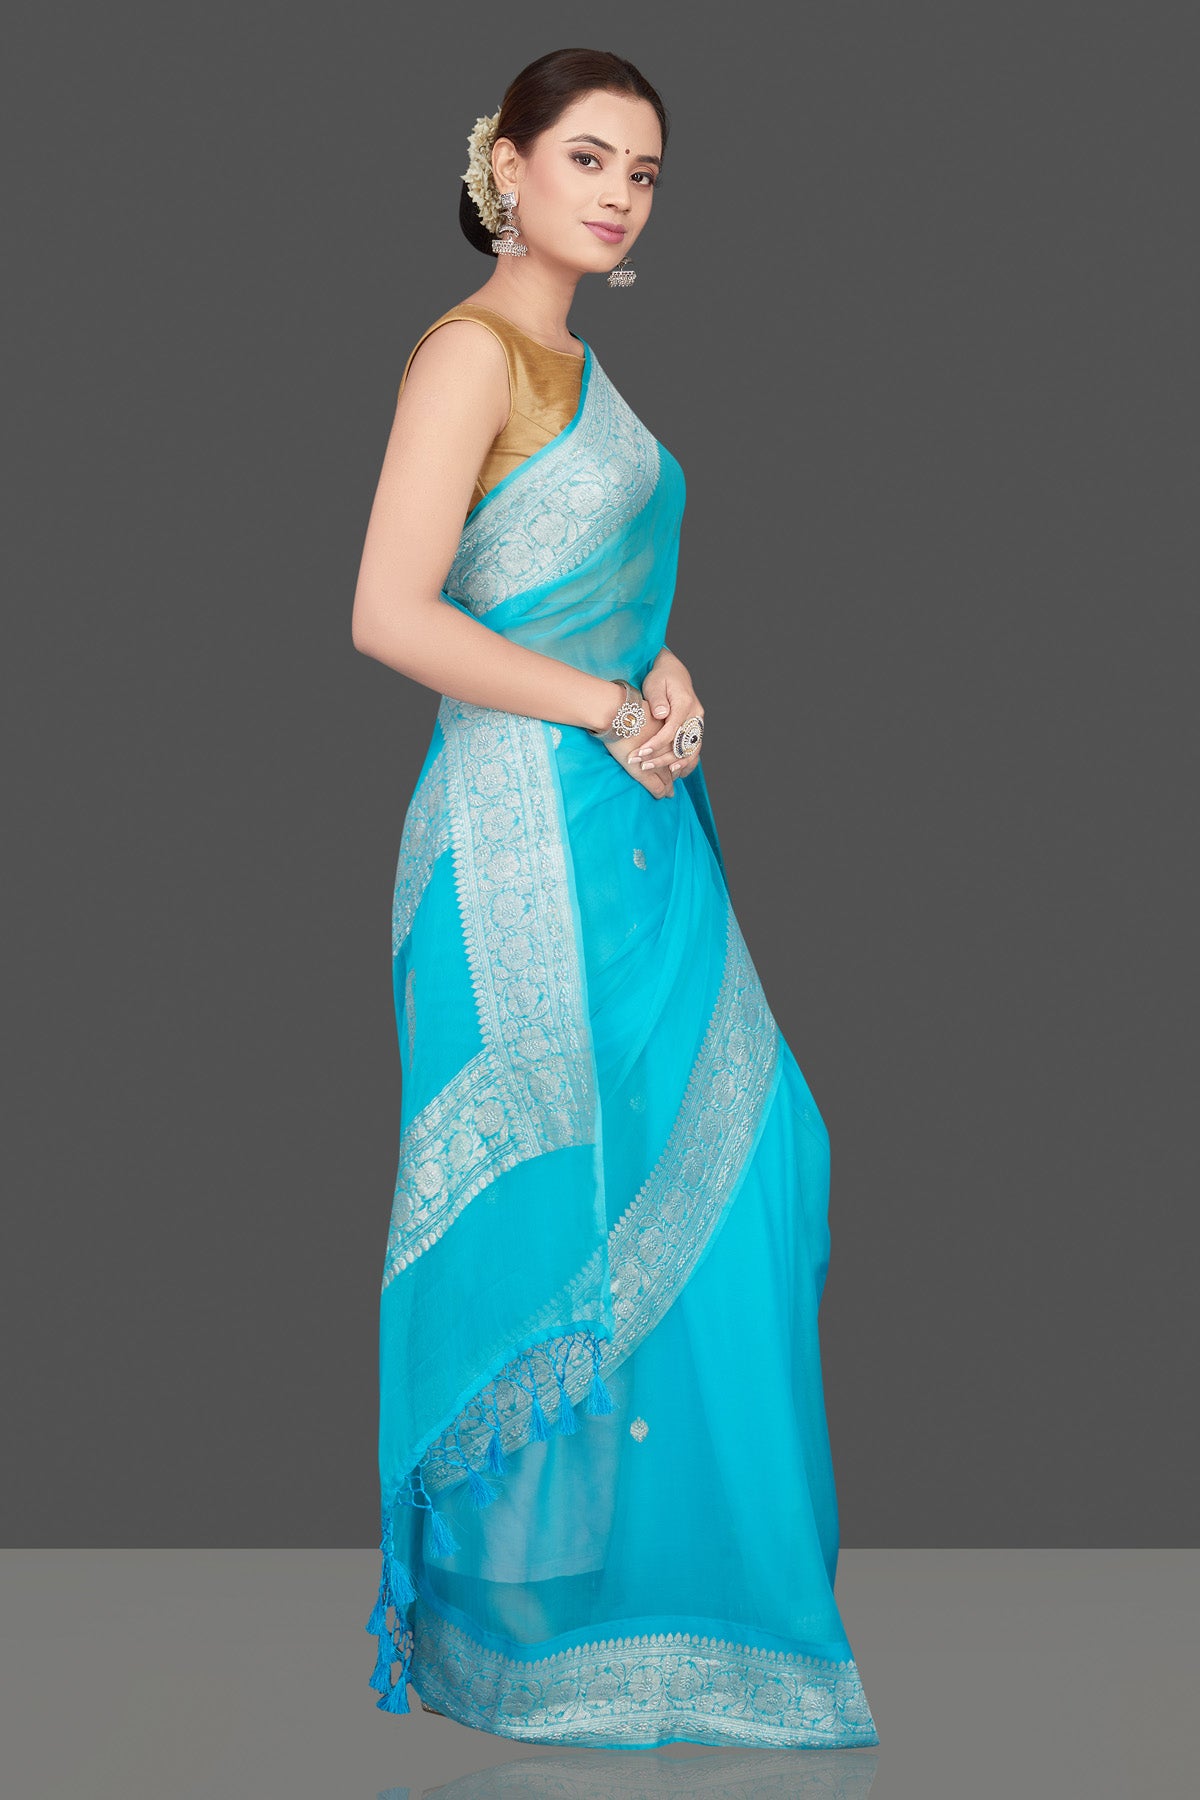 Buy beautiful sky blue chiffon georgette sari online in USA with silver zari border. Go for stunning Indian designer sarees, georgette sarees, handwoven saris, embroidered sarees for festive occasions and weddings from Pure Elegance Indian clothing store in USA.-side